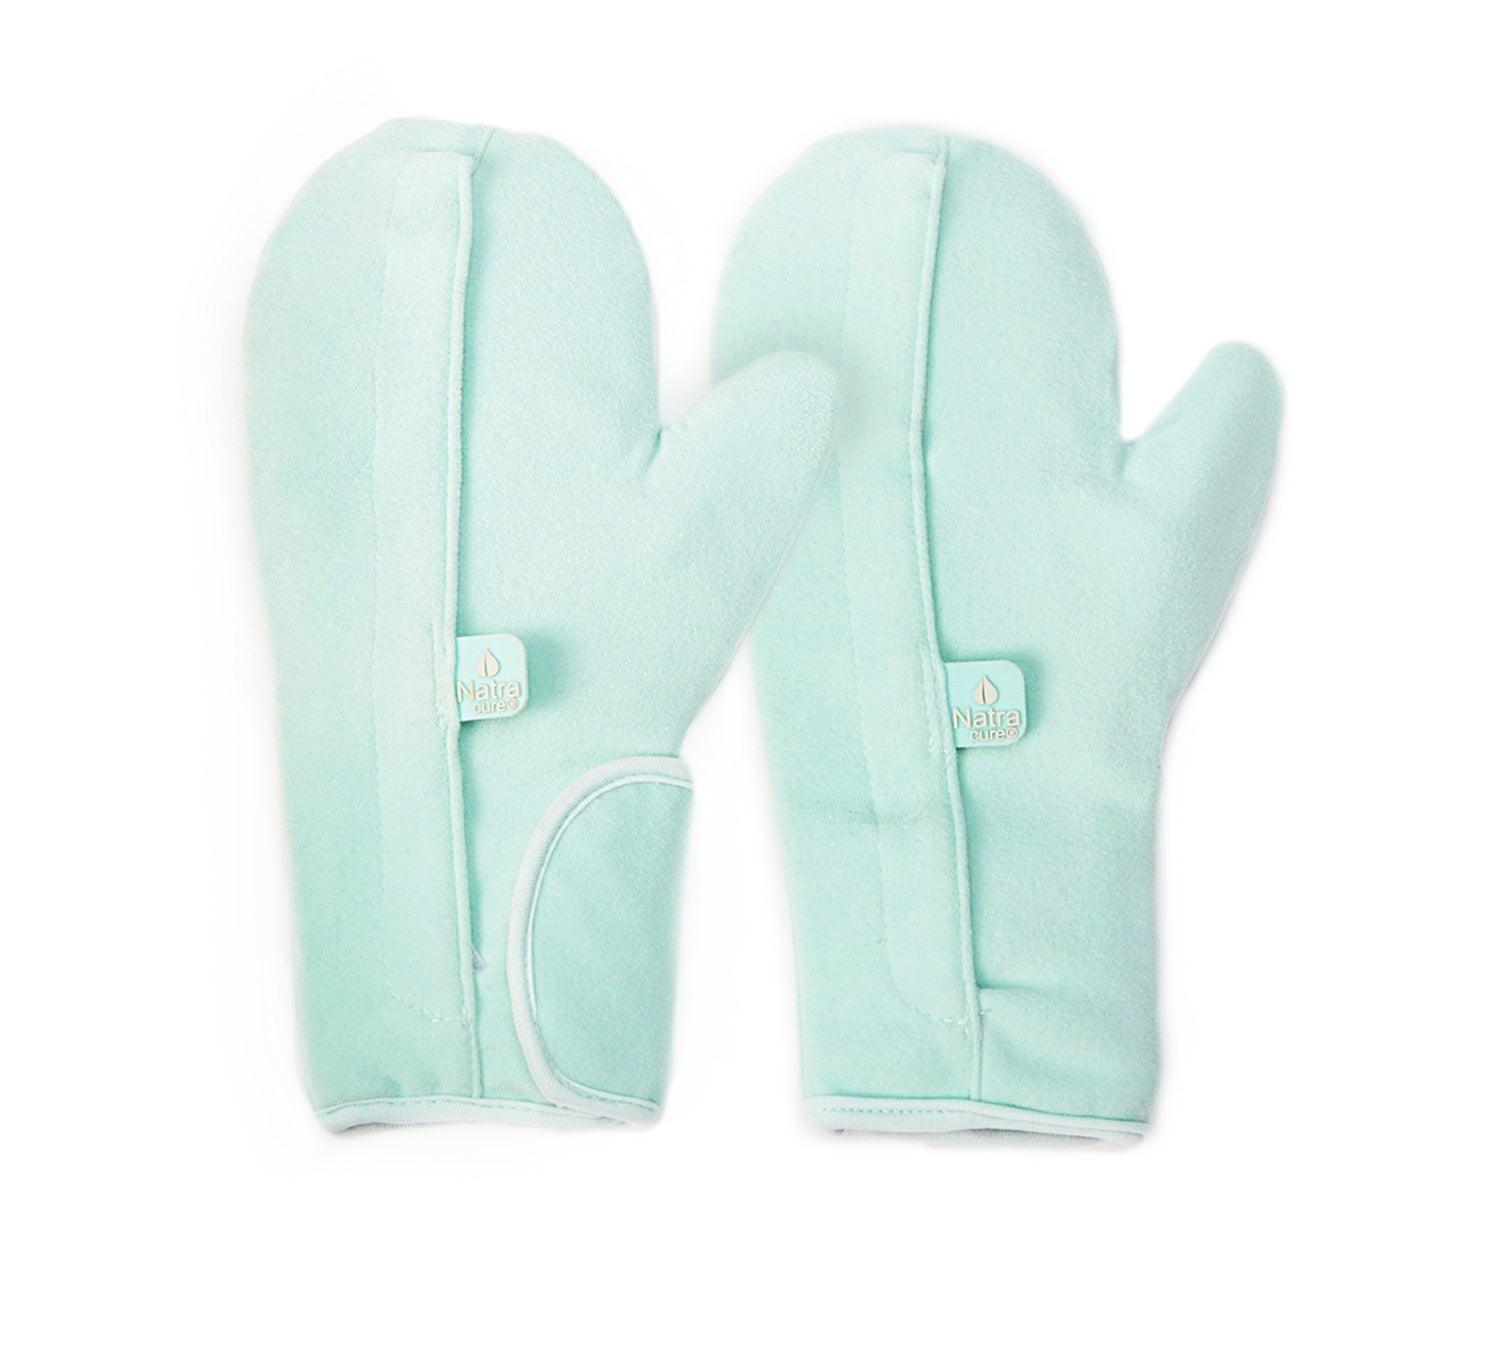 Cold Therapy Mittens blue